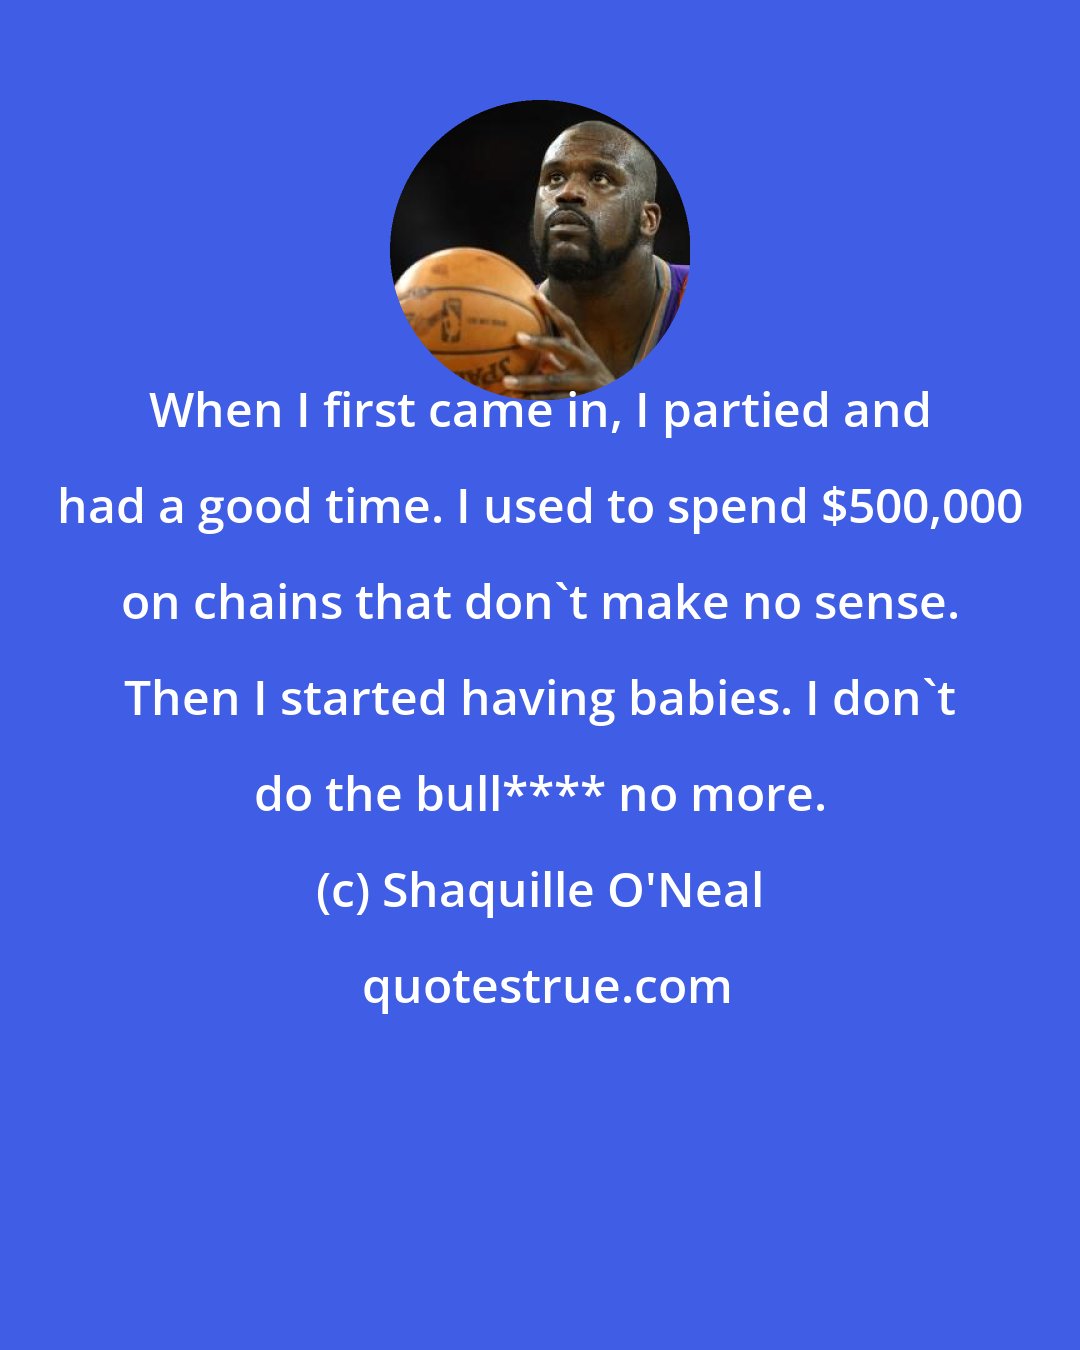 Shaquille O'Neal: When I first came in, I partied and had a good time. I used to spend $500,000 on chains that don't make no sense. Then I started having babies. I don't do the bull**** no more.